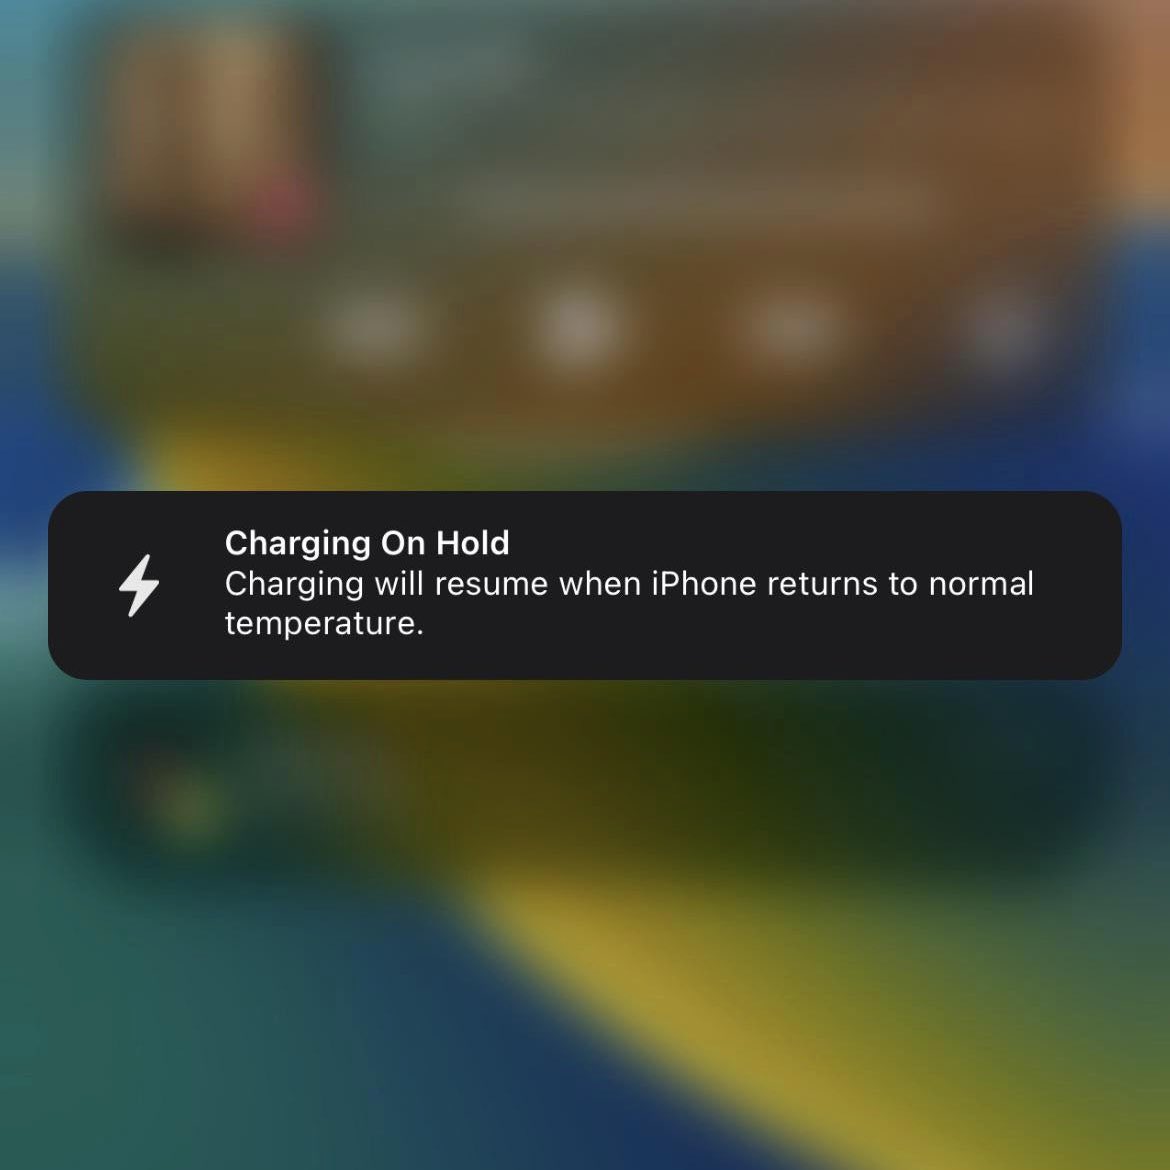 How to fix “Charging On Hold” warning in iOS 16